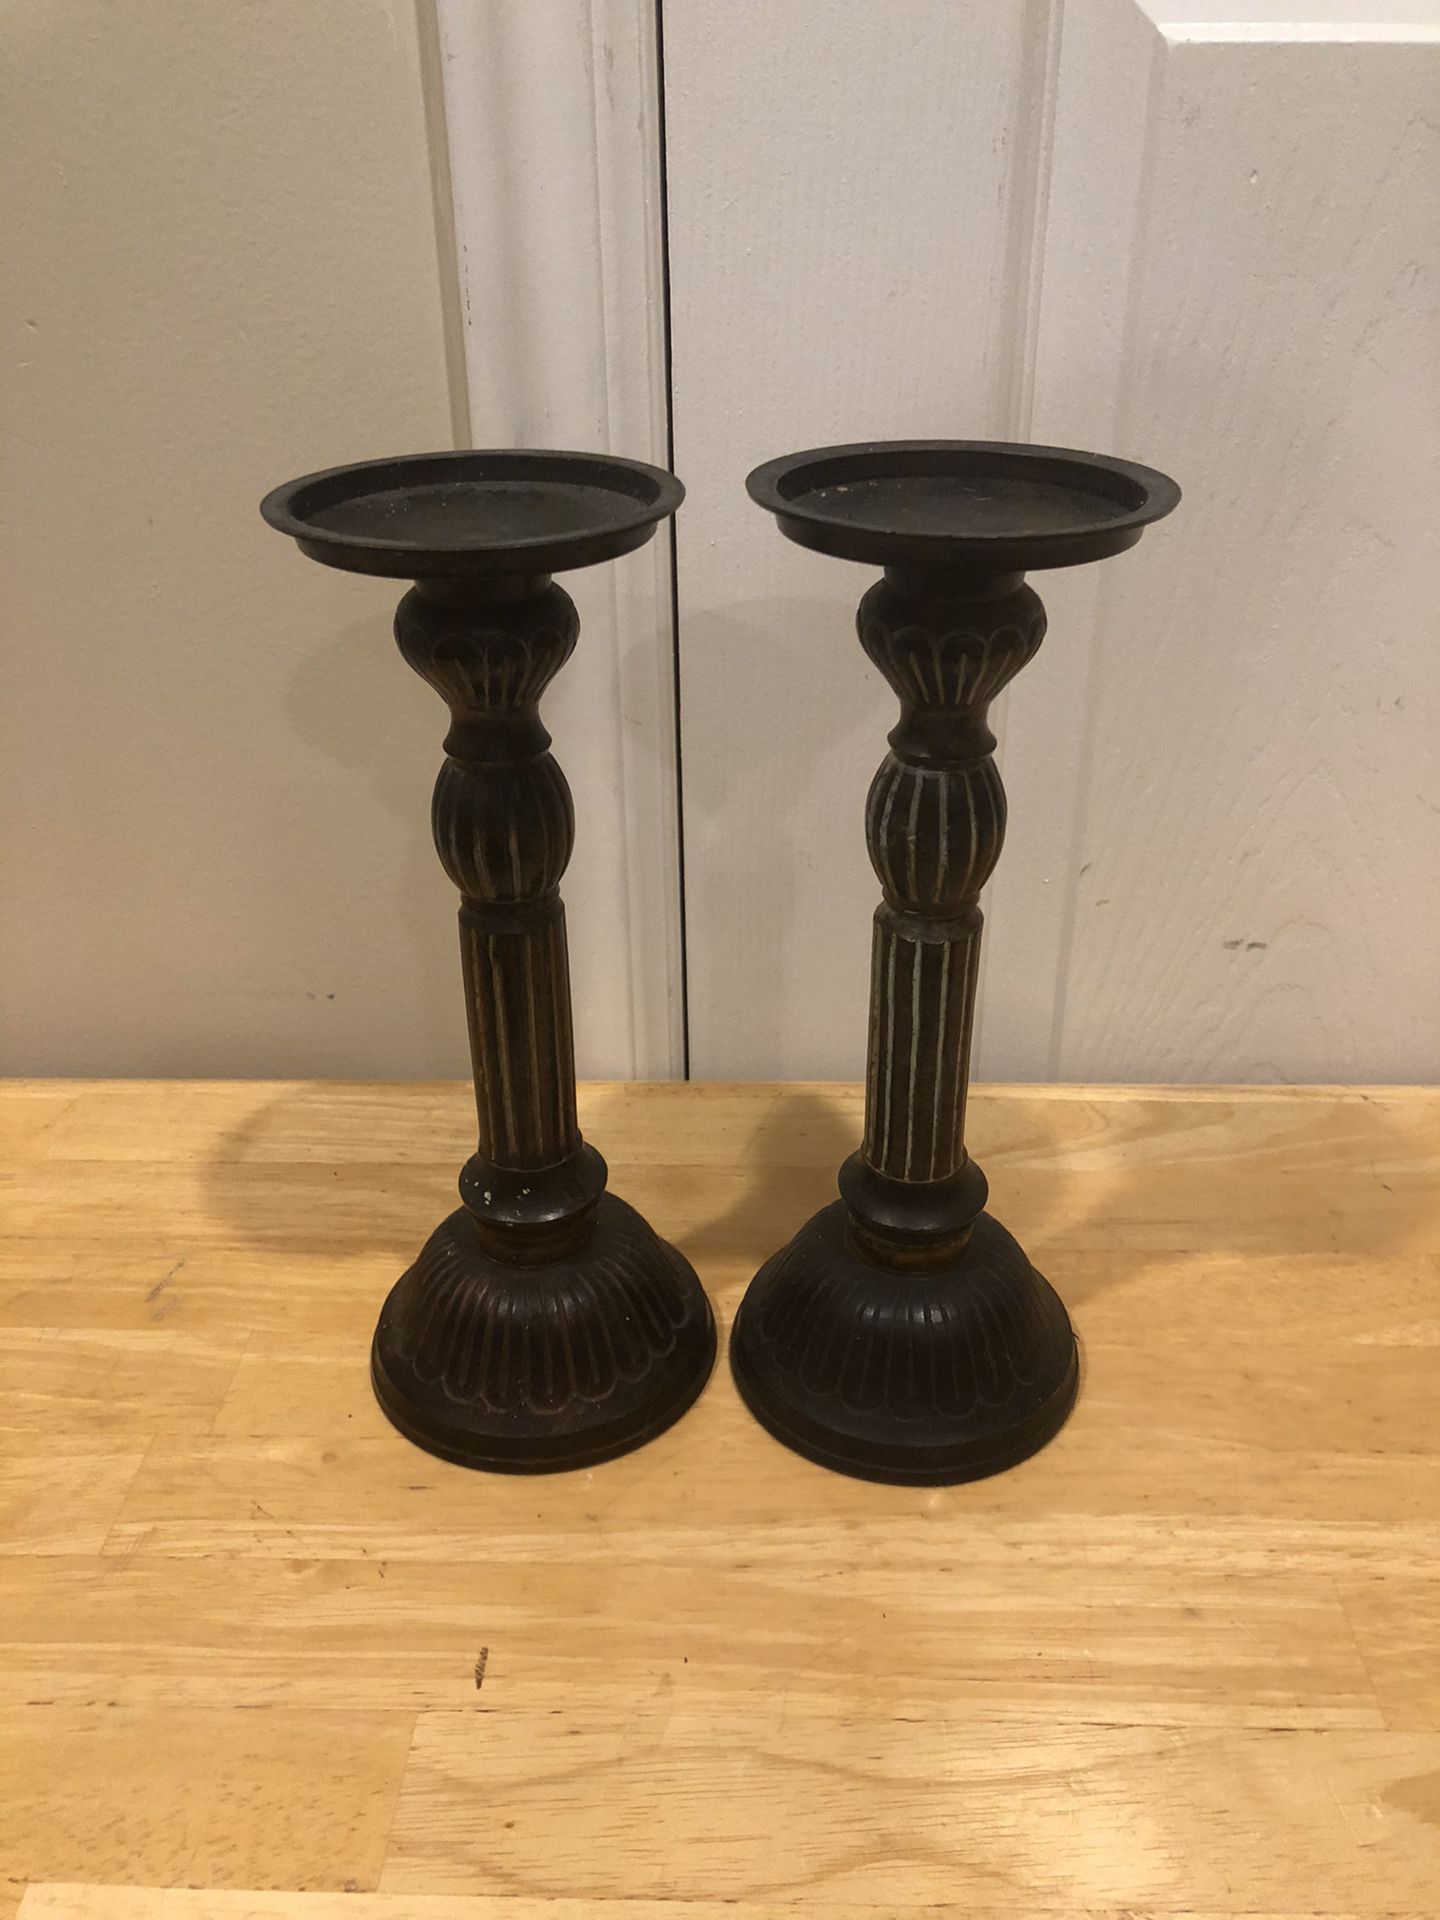 Awesome Set of 2 Vintage Metal Pillar Candle Holders!!